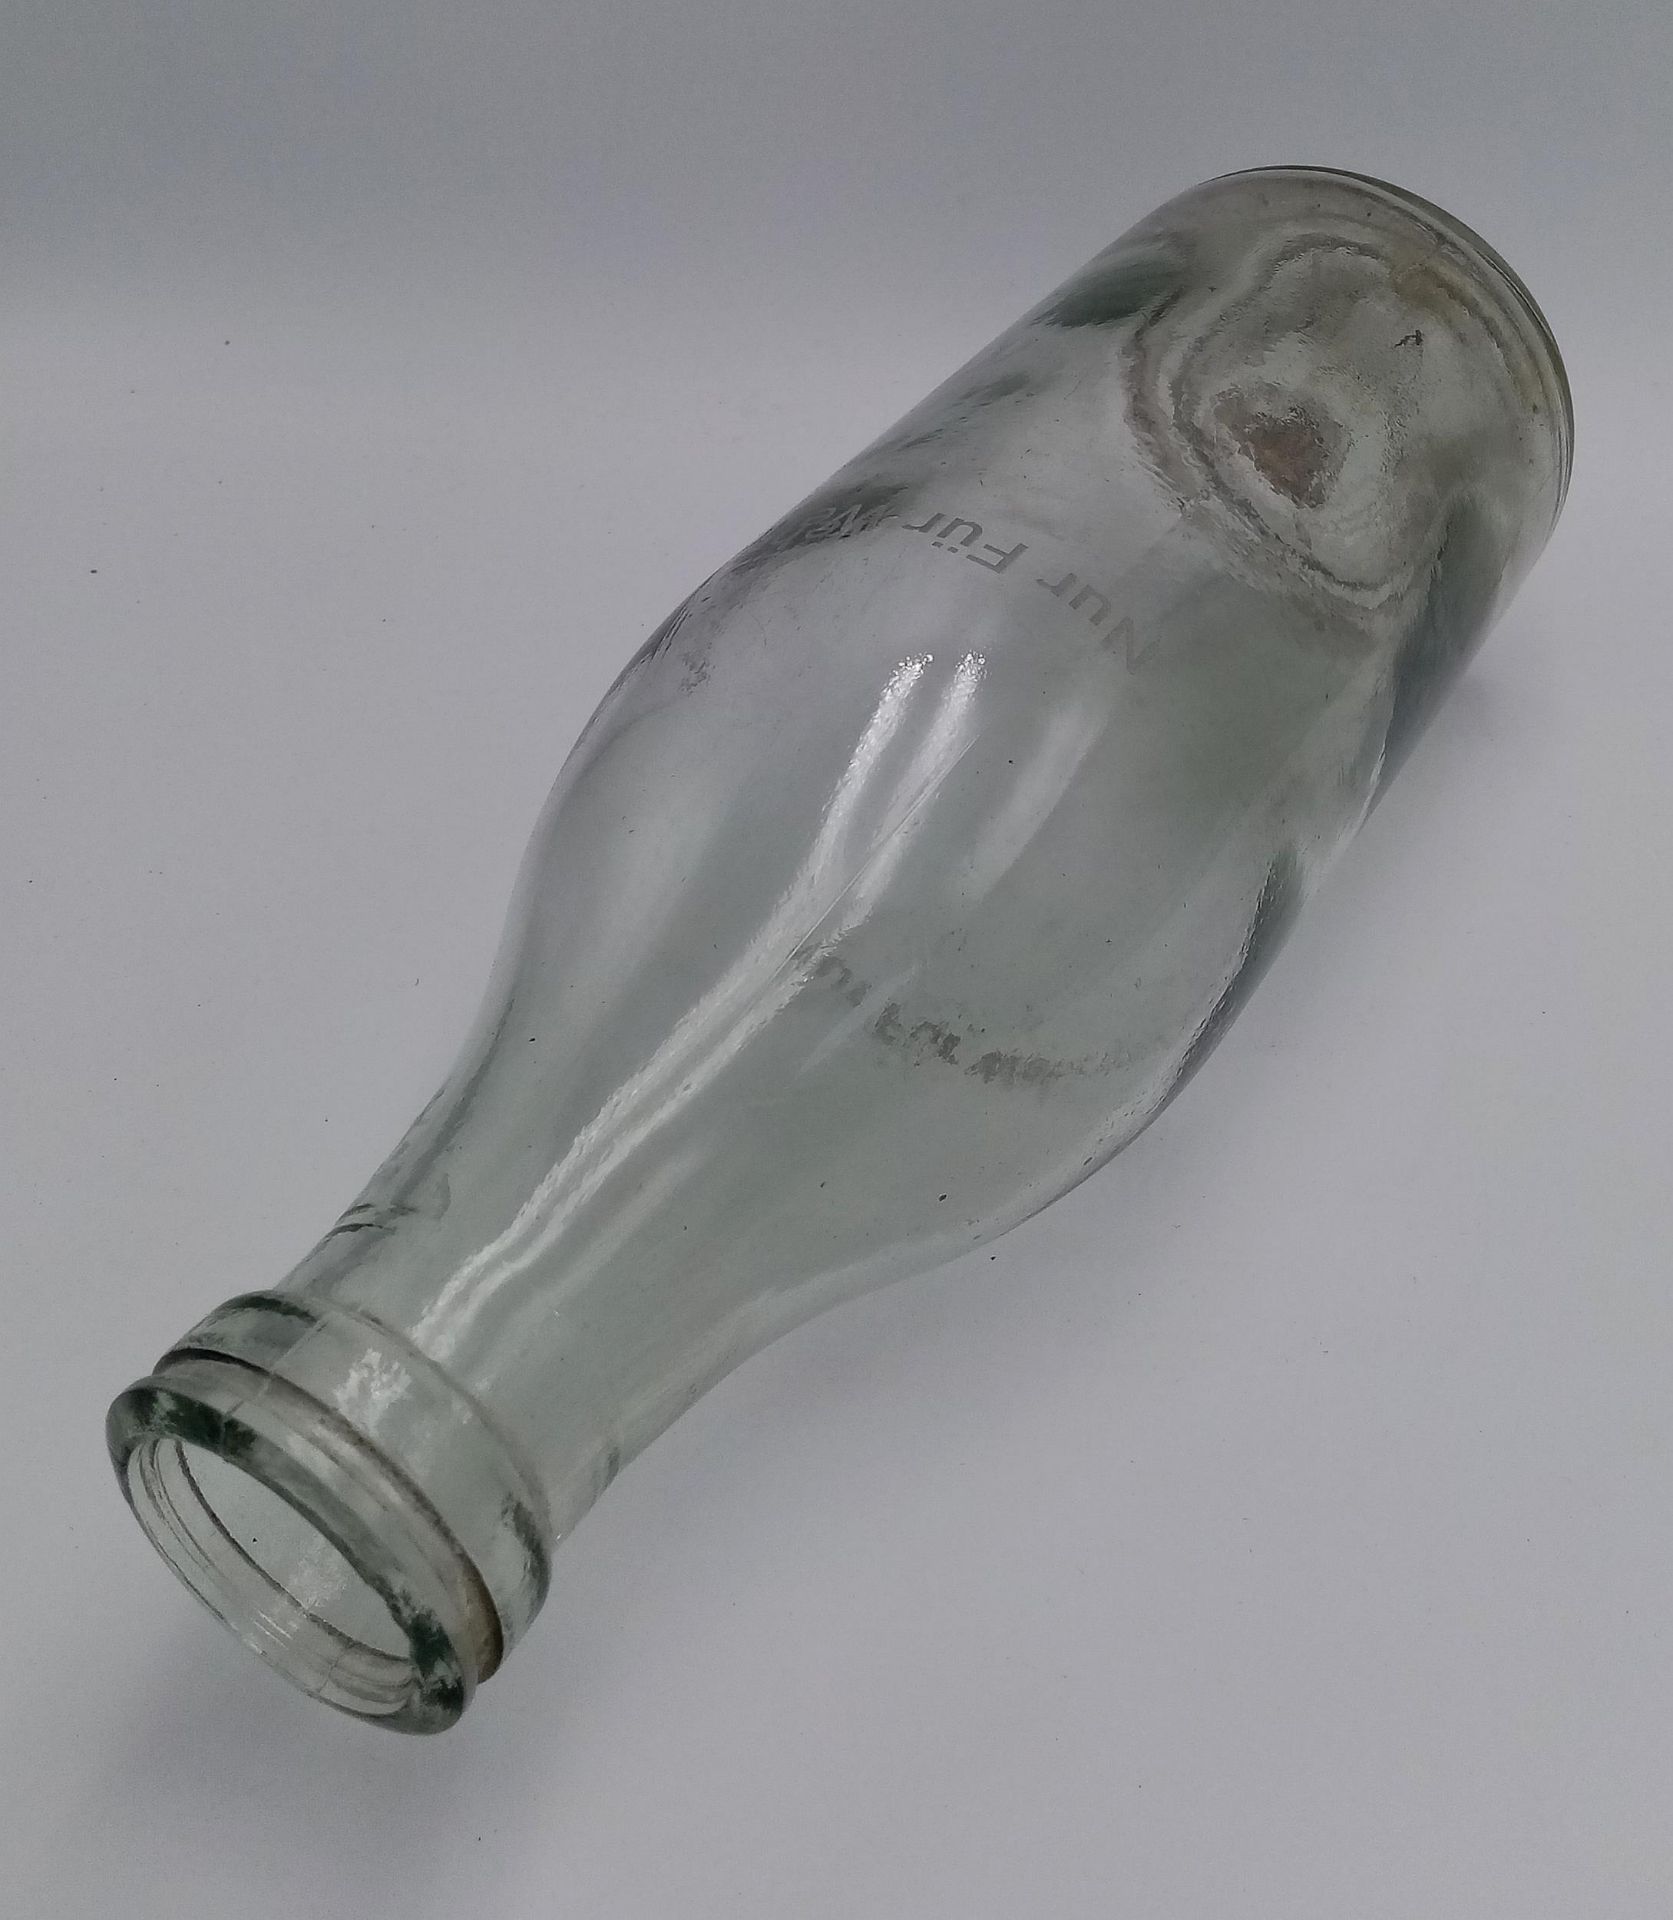 WW2 German Milk Bottle “For the Army Only” - Image 3 of 3